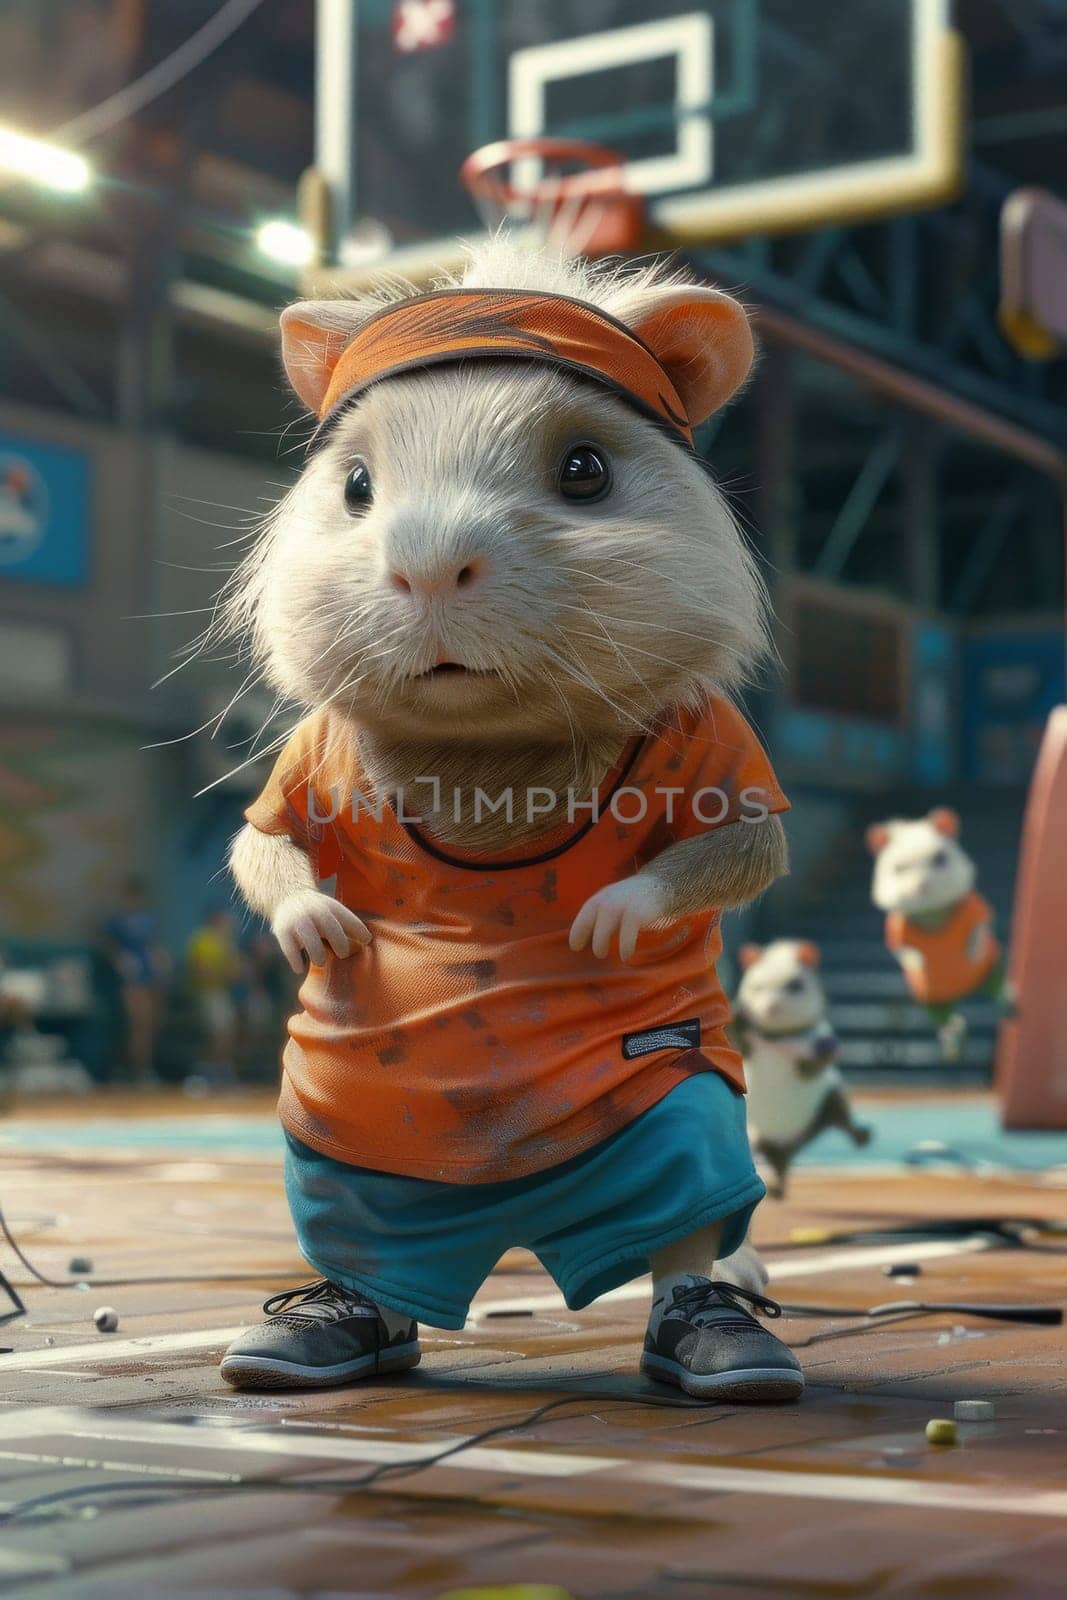 A cartoon of a hamster wearing an orange shirt and blue shorts by itchaznong